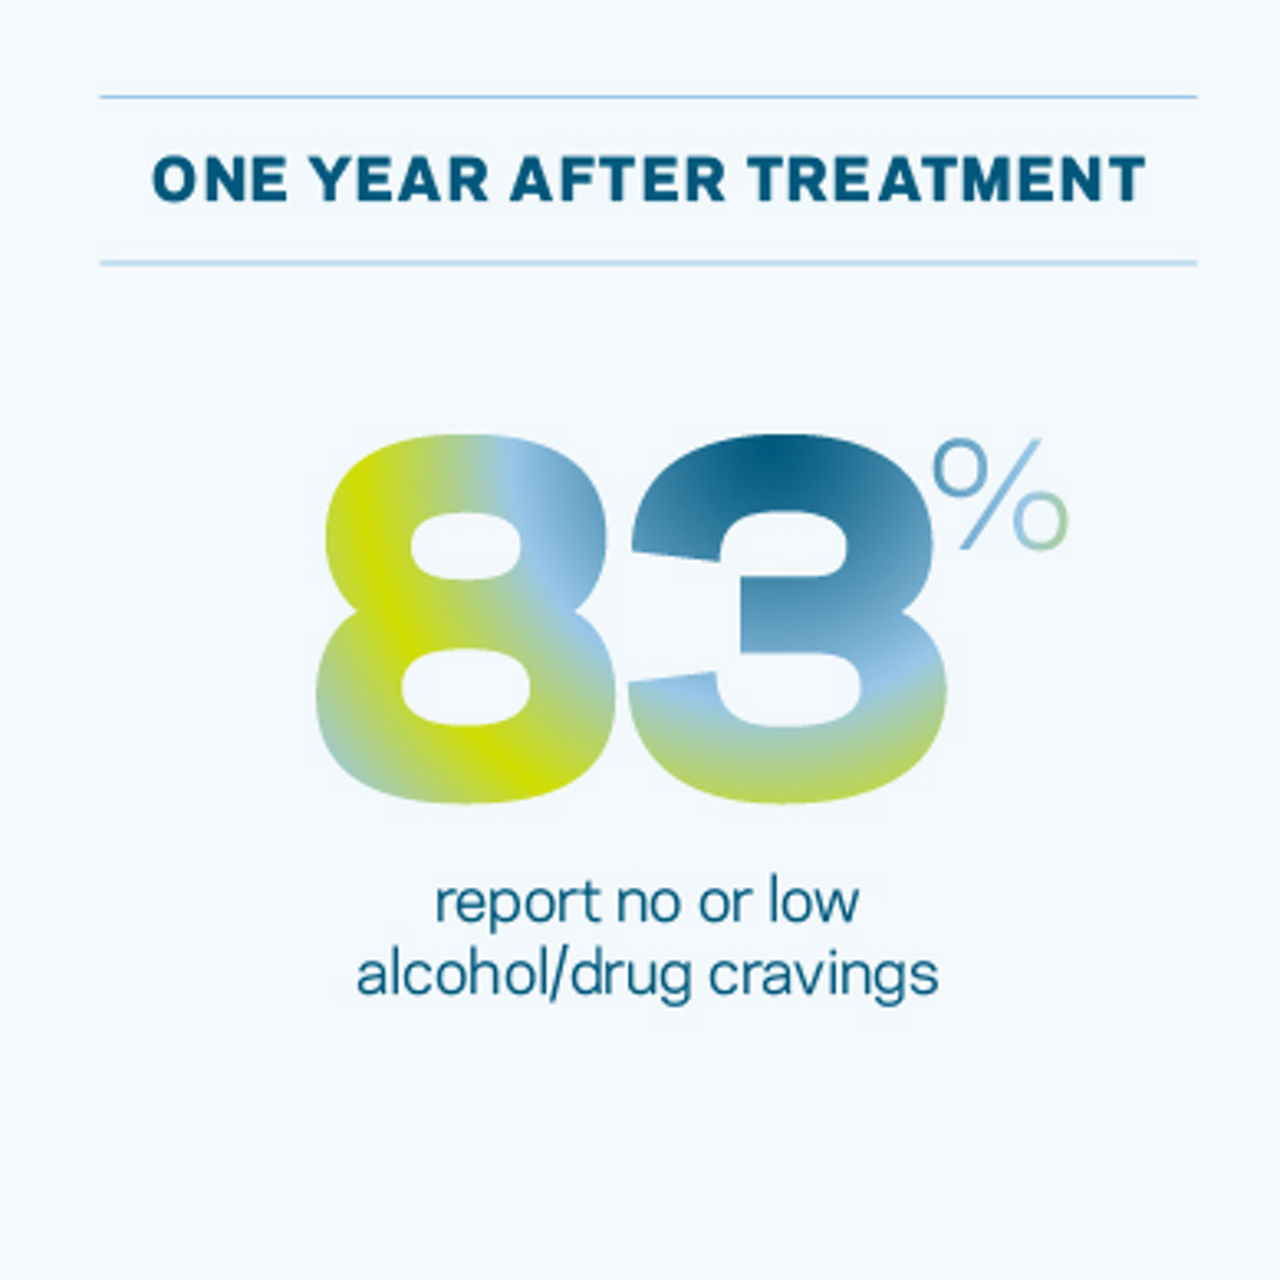 One year after treatment, 83 percent of our patients report low or no alcohol or drug cravings